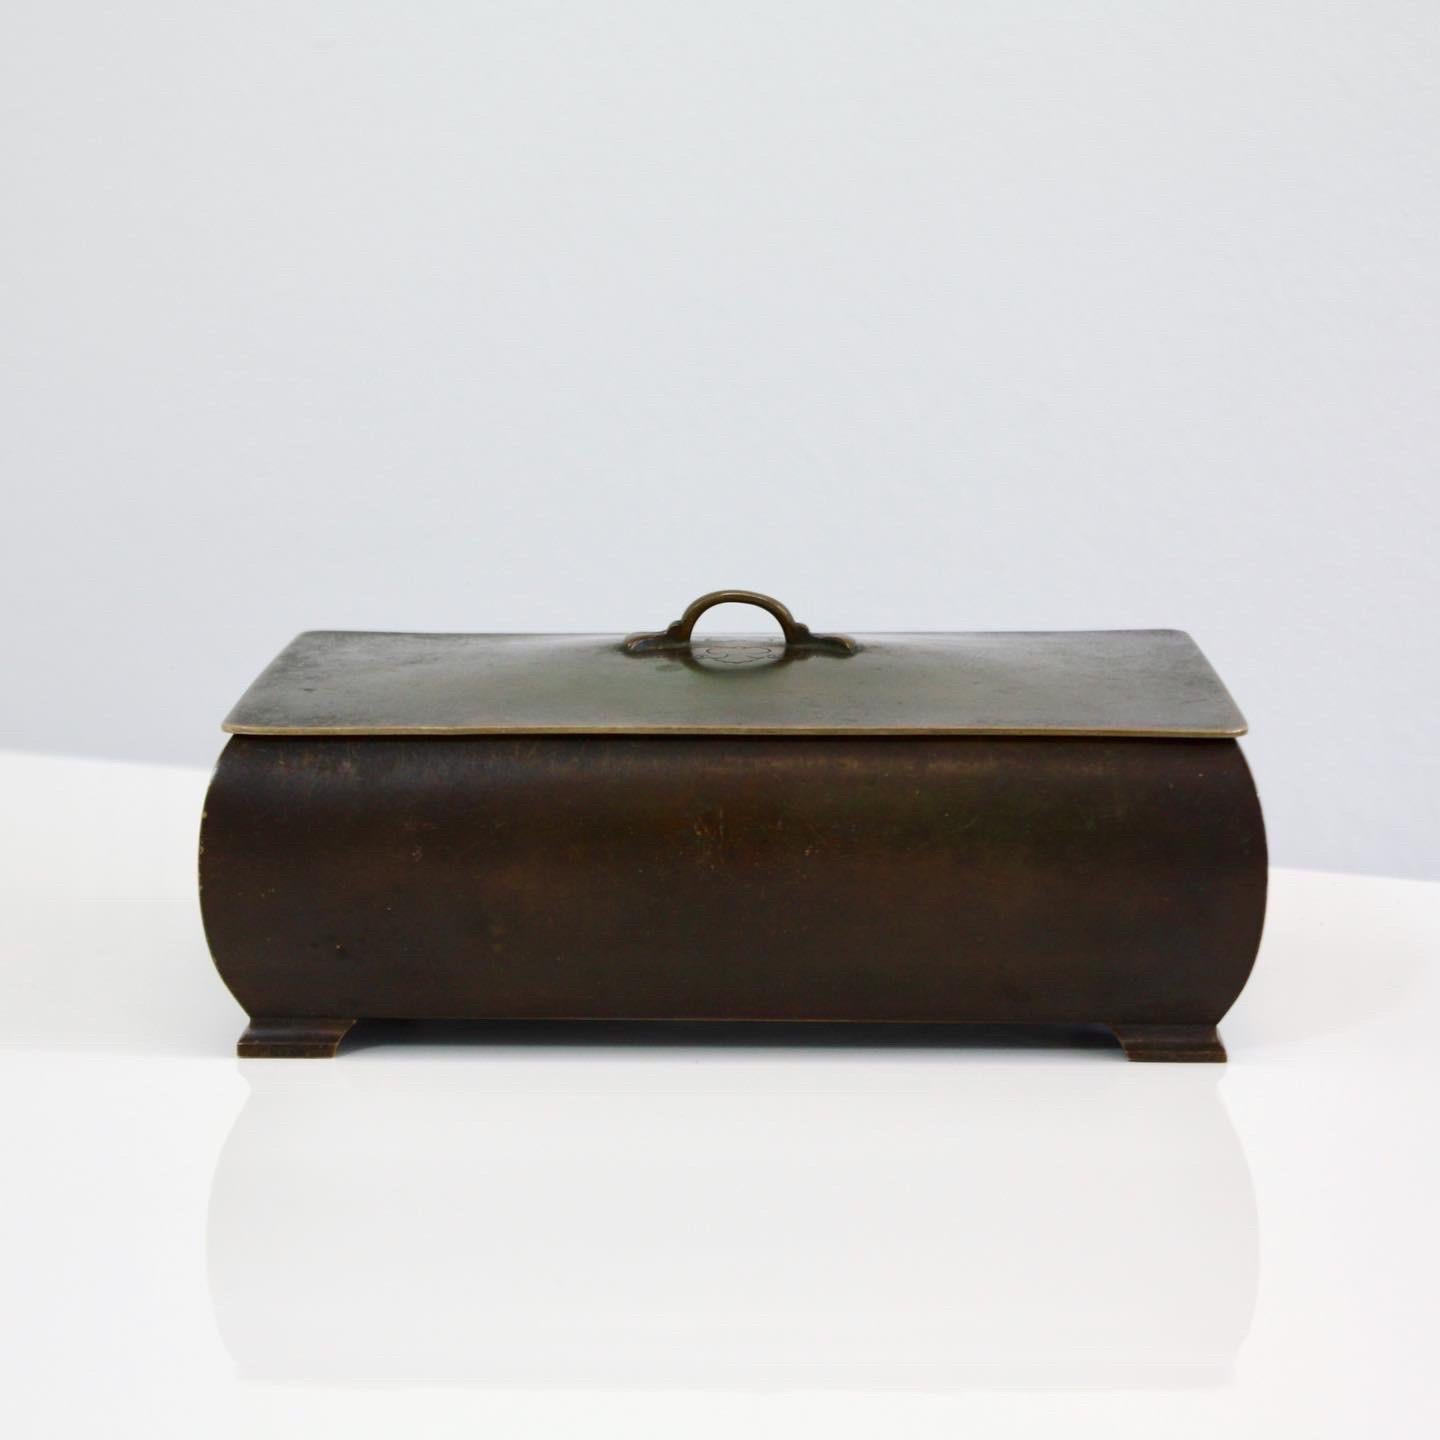 A large bronze casket in great vintage condition designed by Just Andersen in the 1920s. It is a true a testament to Andersen's exceptional skill as a artist and craftsman. A stunning object perfect for storing jewelry and other treasures.

* A